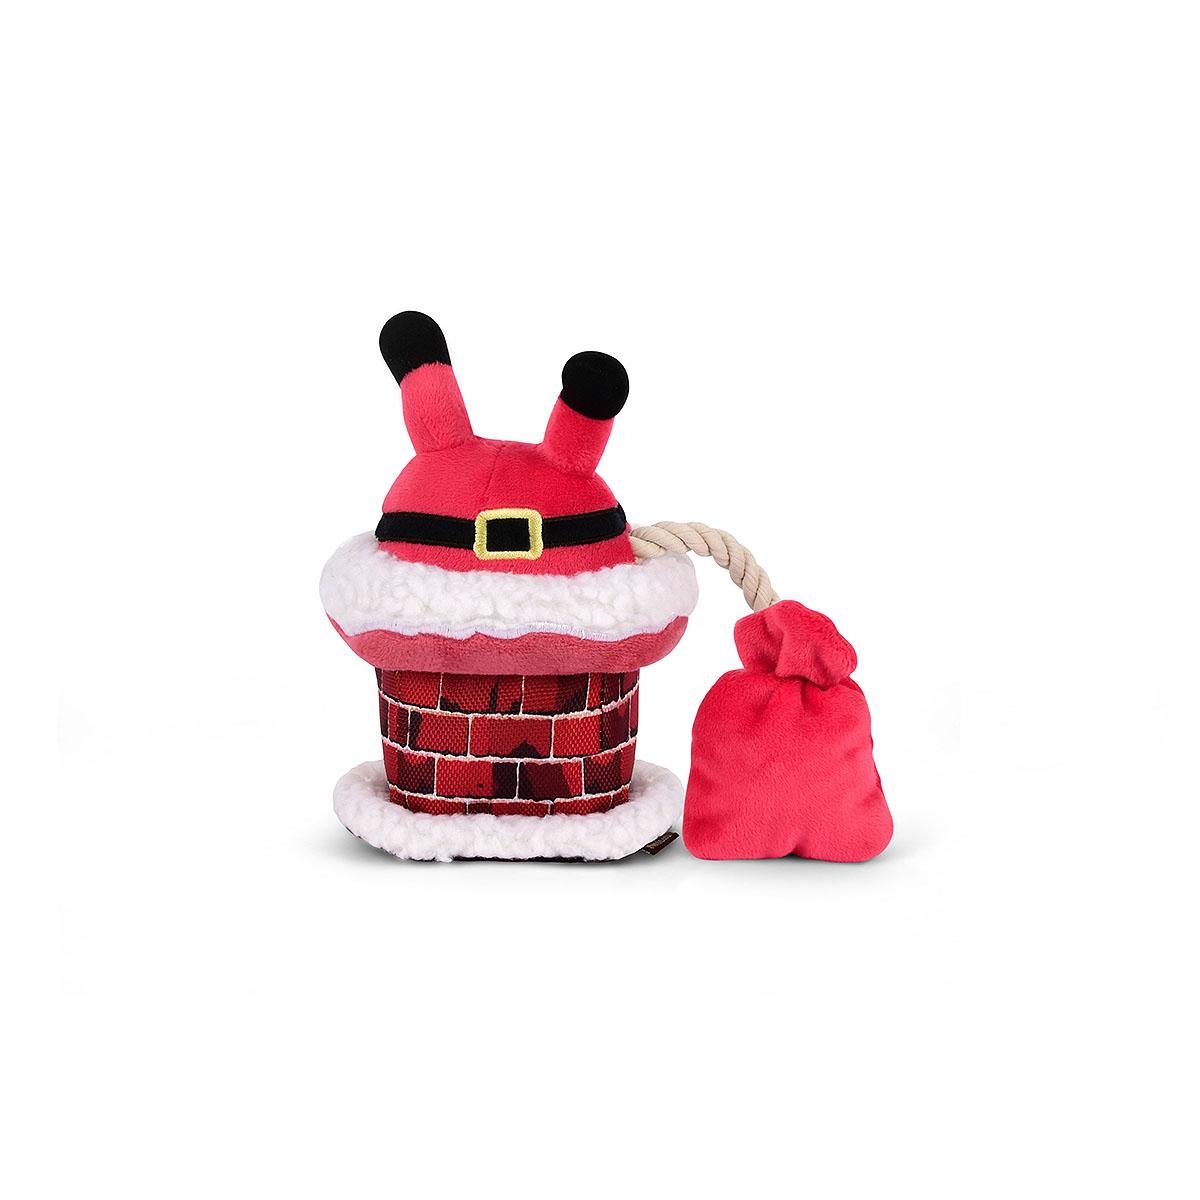 P.L.A.Y. Merry Woofmas Dog Toy - Clumsy Claus